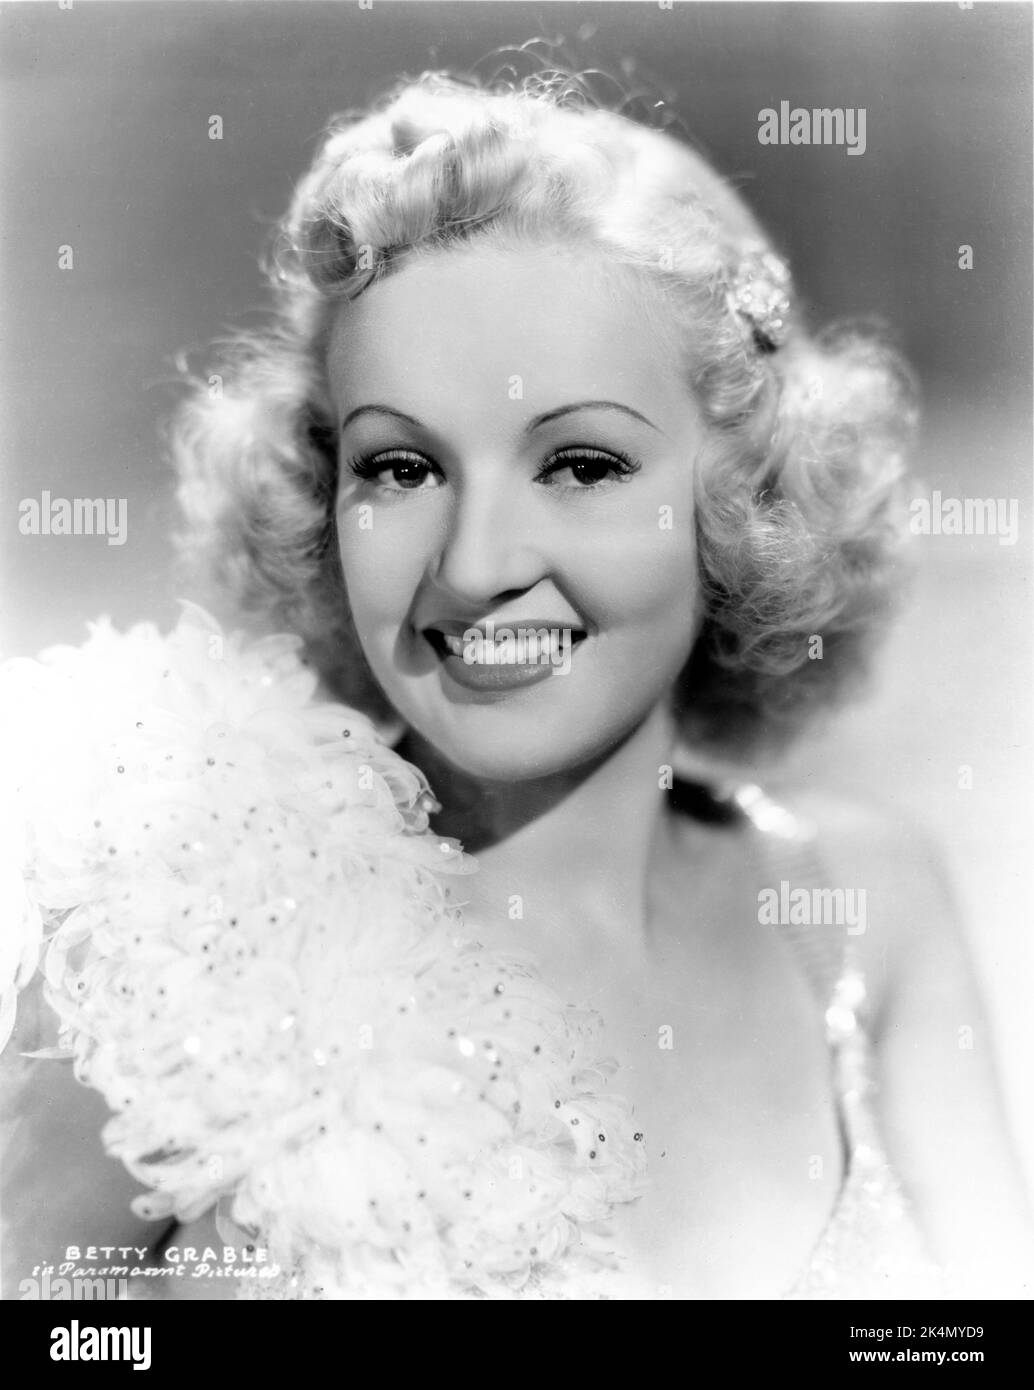 BETTY GRABLE 1936 Portrait publicity for Paramount Pictures Stock Photo